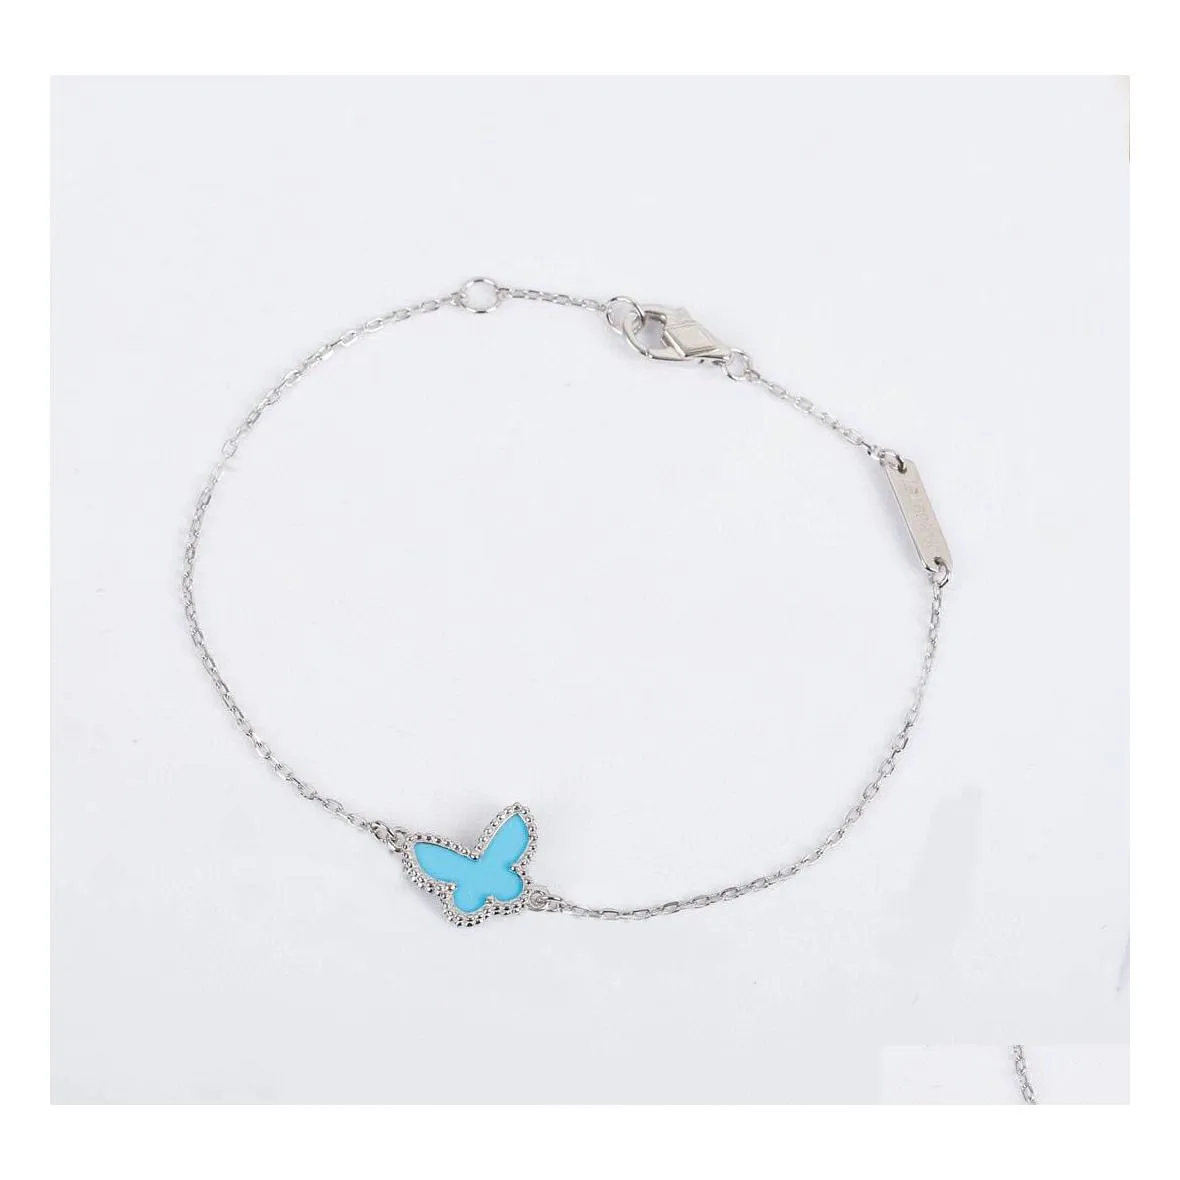 Charm Bracelets S925 Sier Pendant Bracelet With Blue Butterfly Shape In Two Colors Plated And Rhombus Clasp For Women Wedding Jewelr Dh4Zu